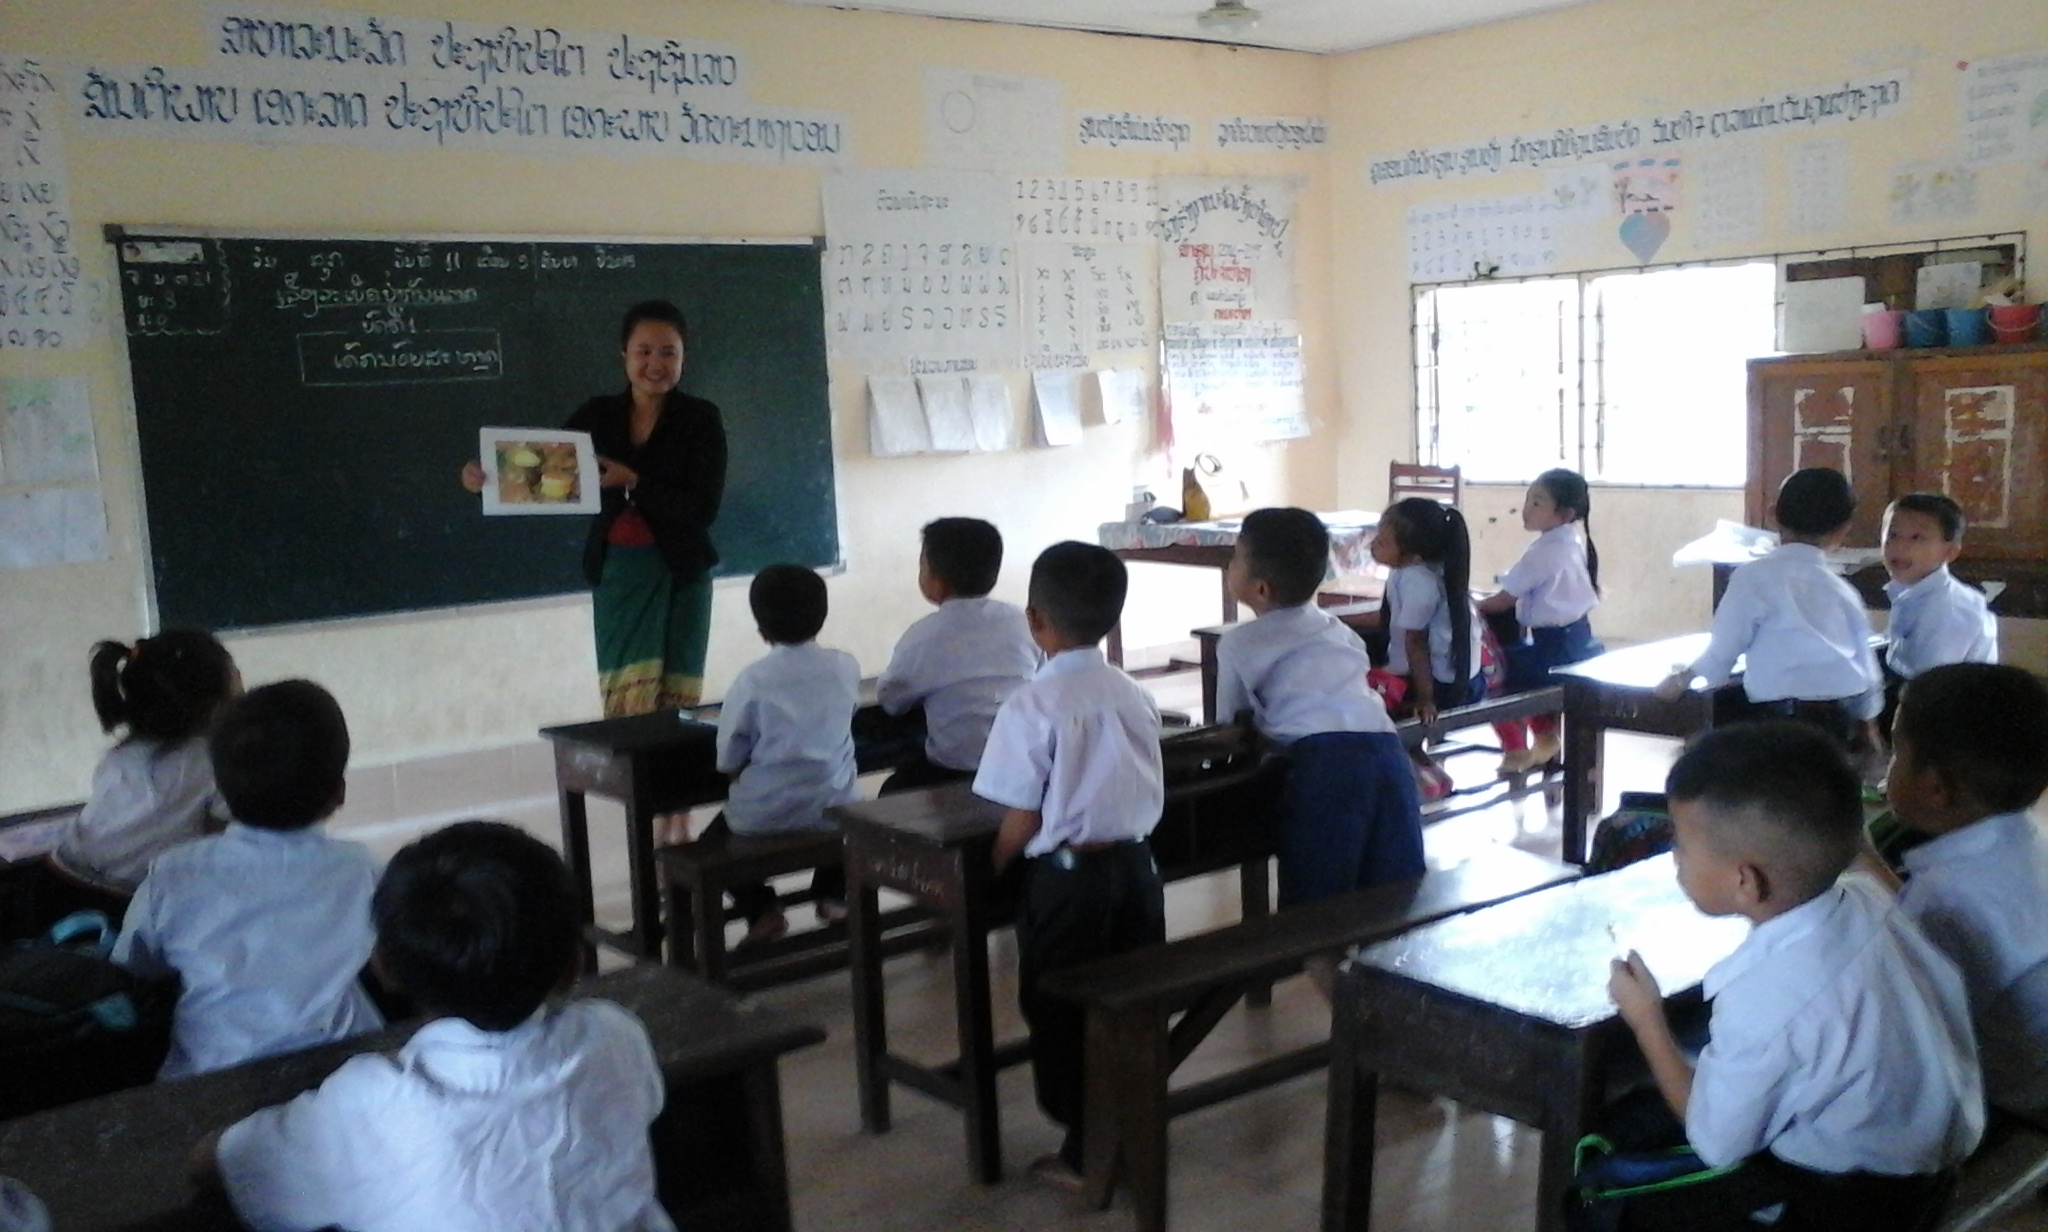 A teacher gives a UXO safety lesson at Vang Vieng Primary School during a teacher training session. September 2015.